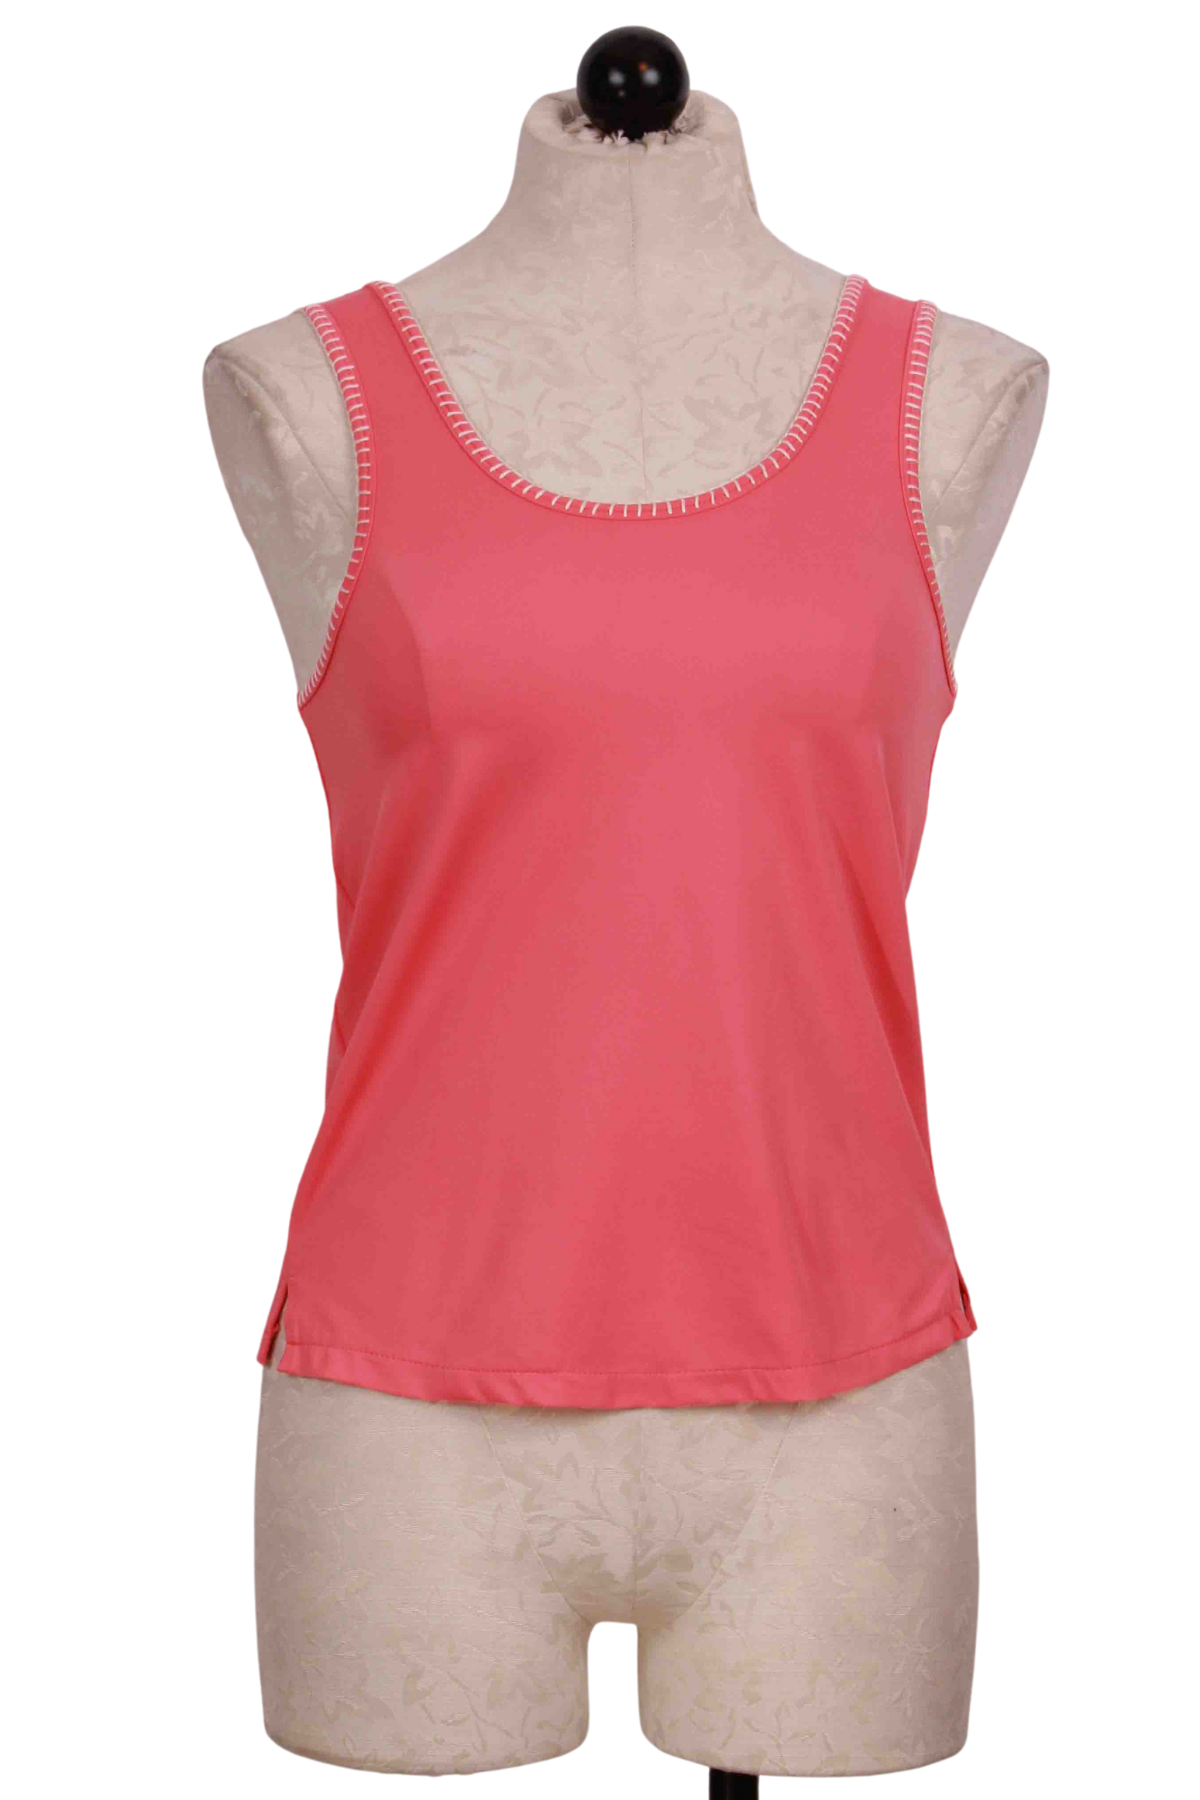 Coral Whipstitch Tank Top by Cabana Life